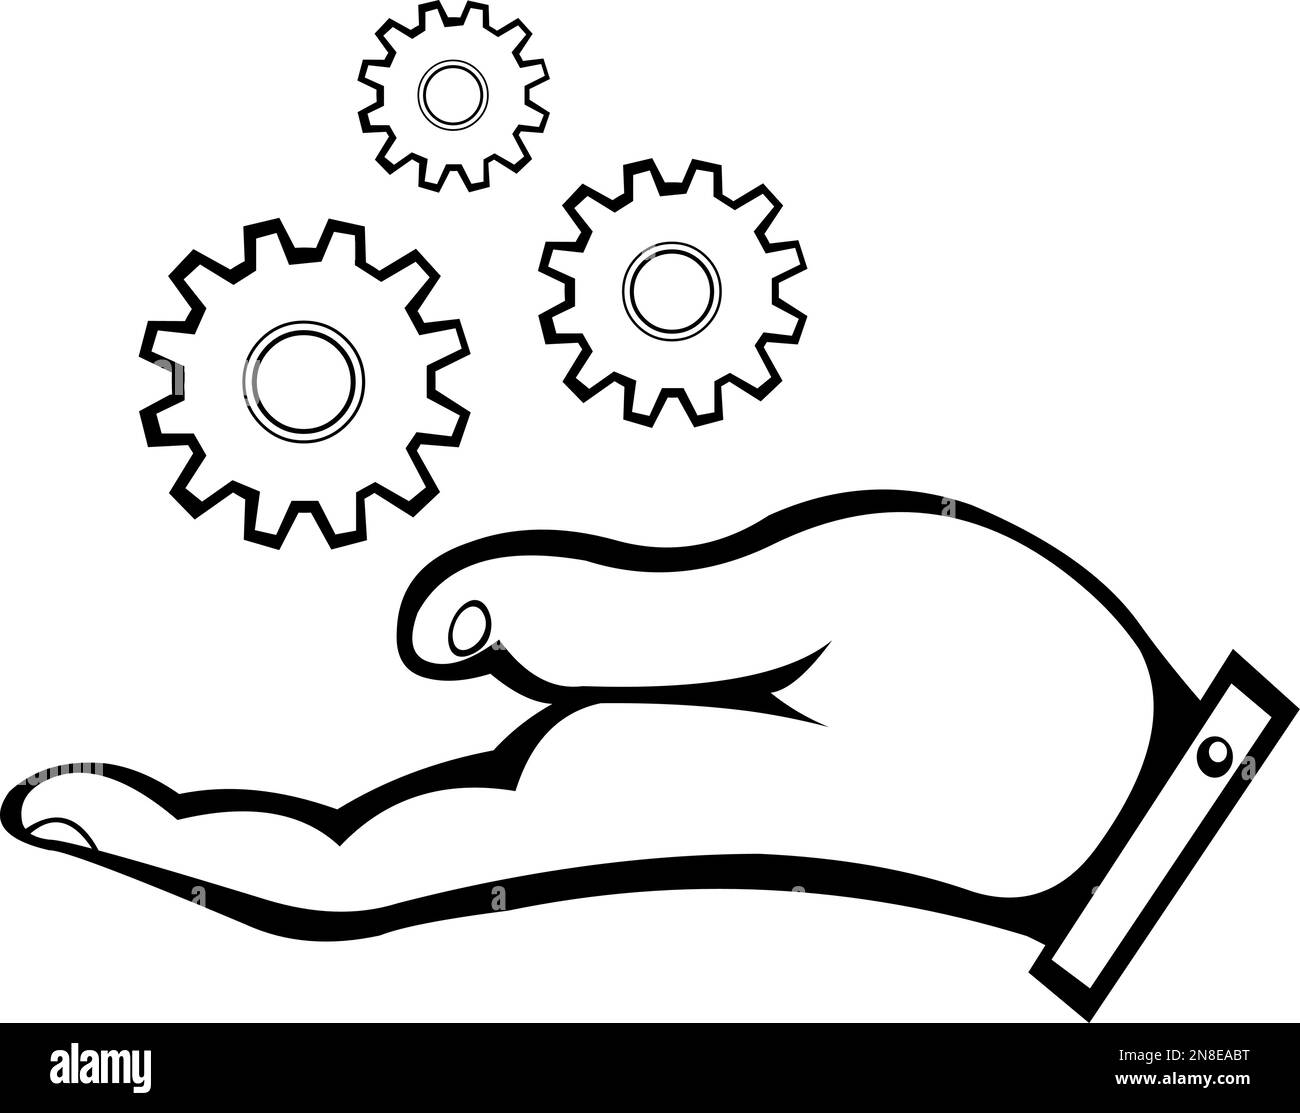 vector illustration icon of a hand with gears, in concept of engineering, industry, construction and innovation Stock Vector